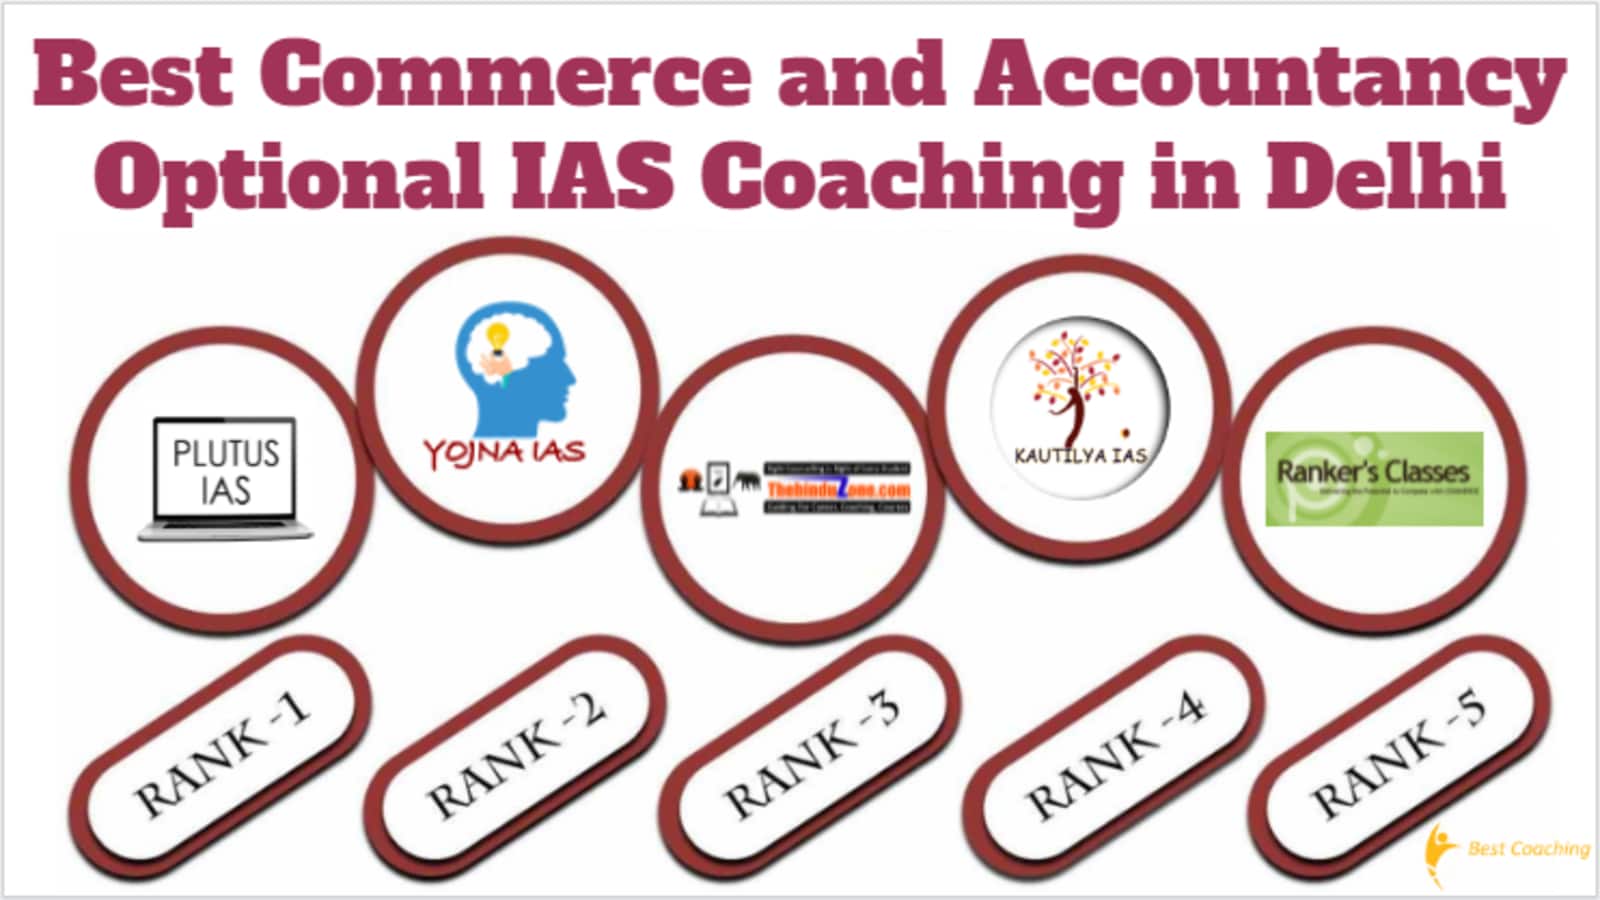 Best Commerce and Accountancy Optional IAS Coaching in Delhi